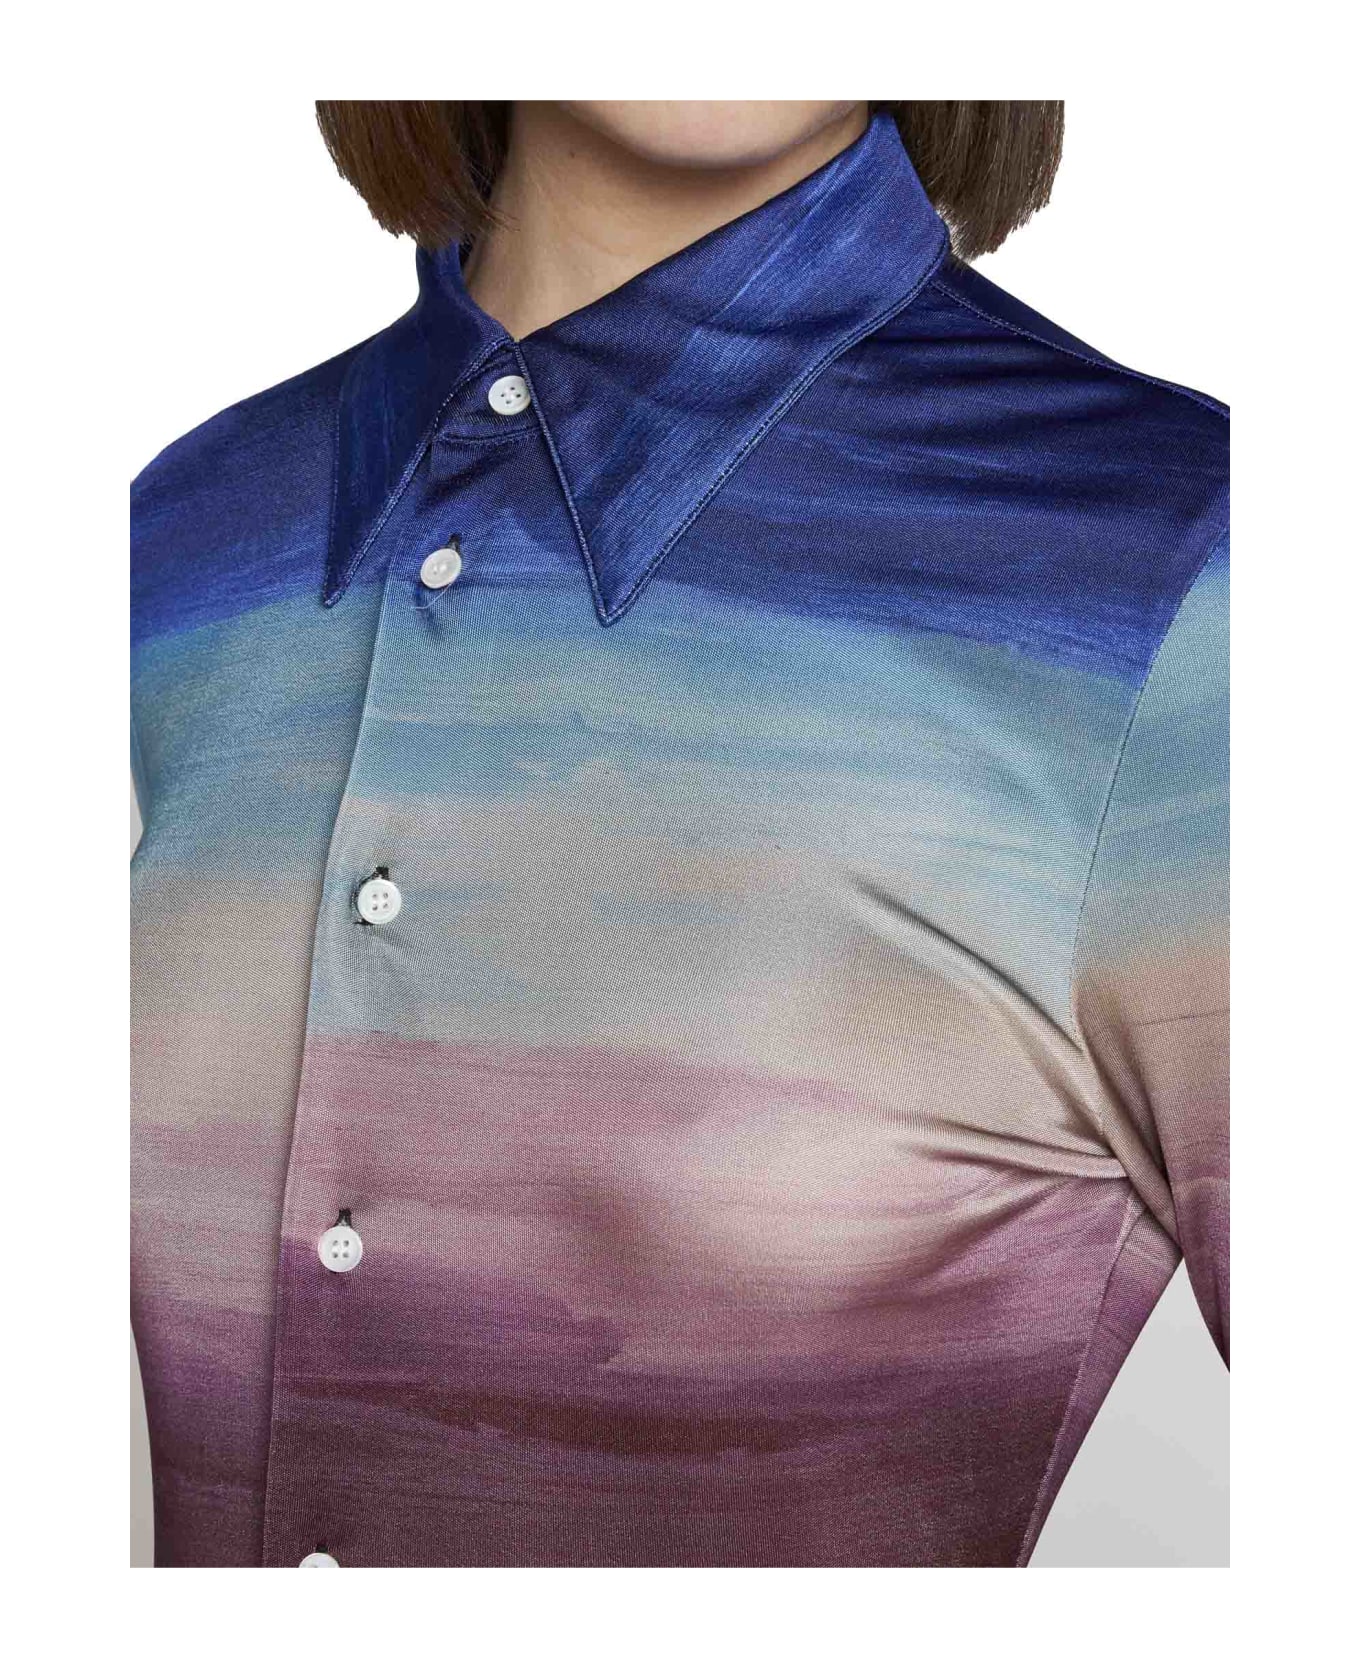 Marni Multicoloured Jersey Shirt With Dark Side Of The Moon Print - MULTICOLORE シャツ